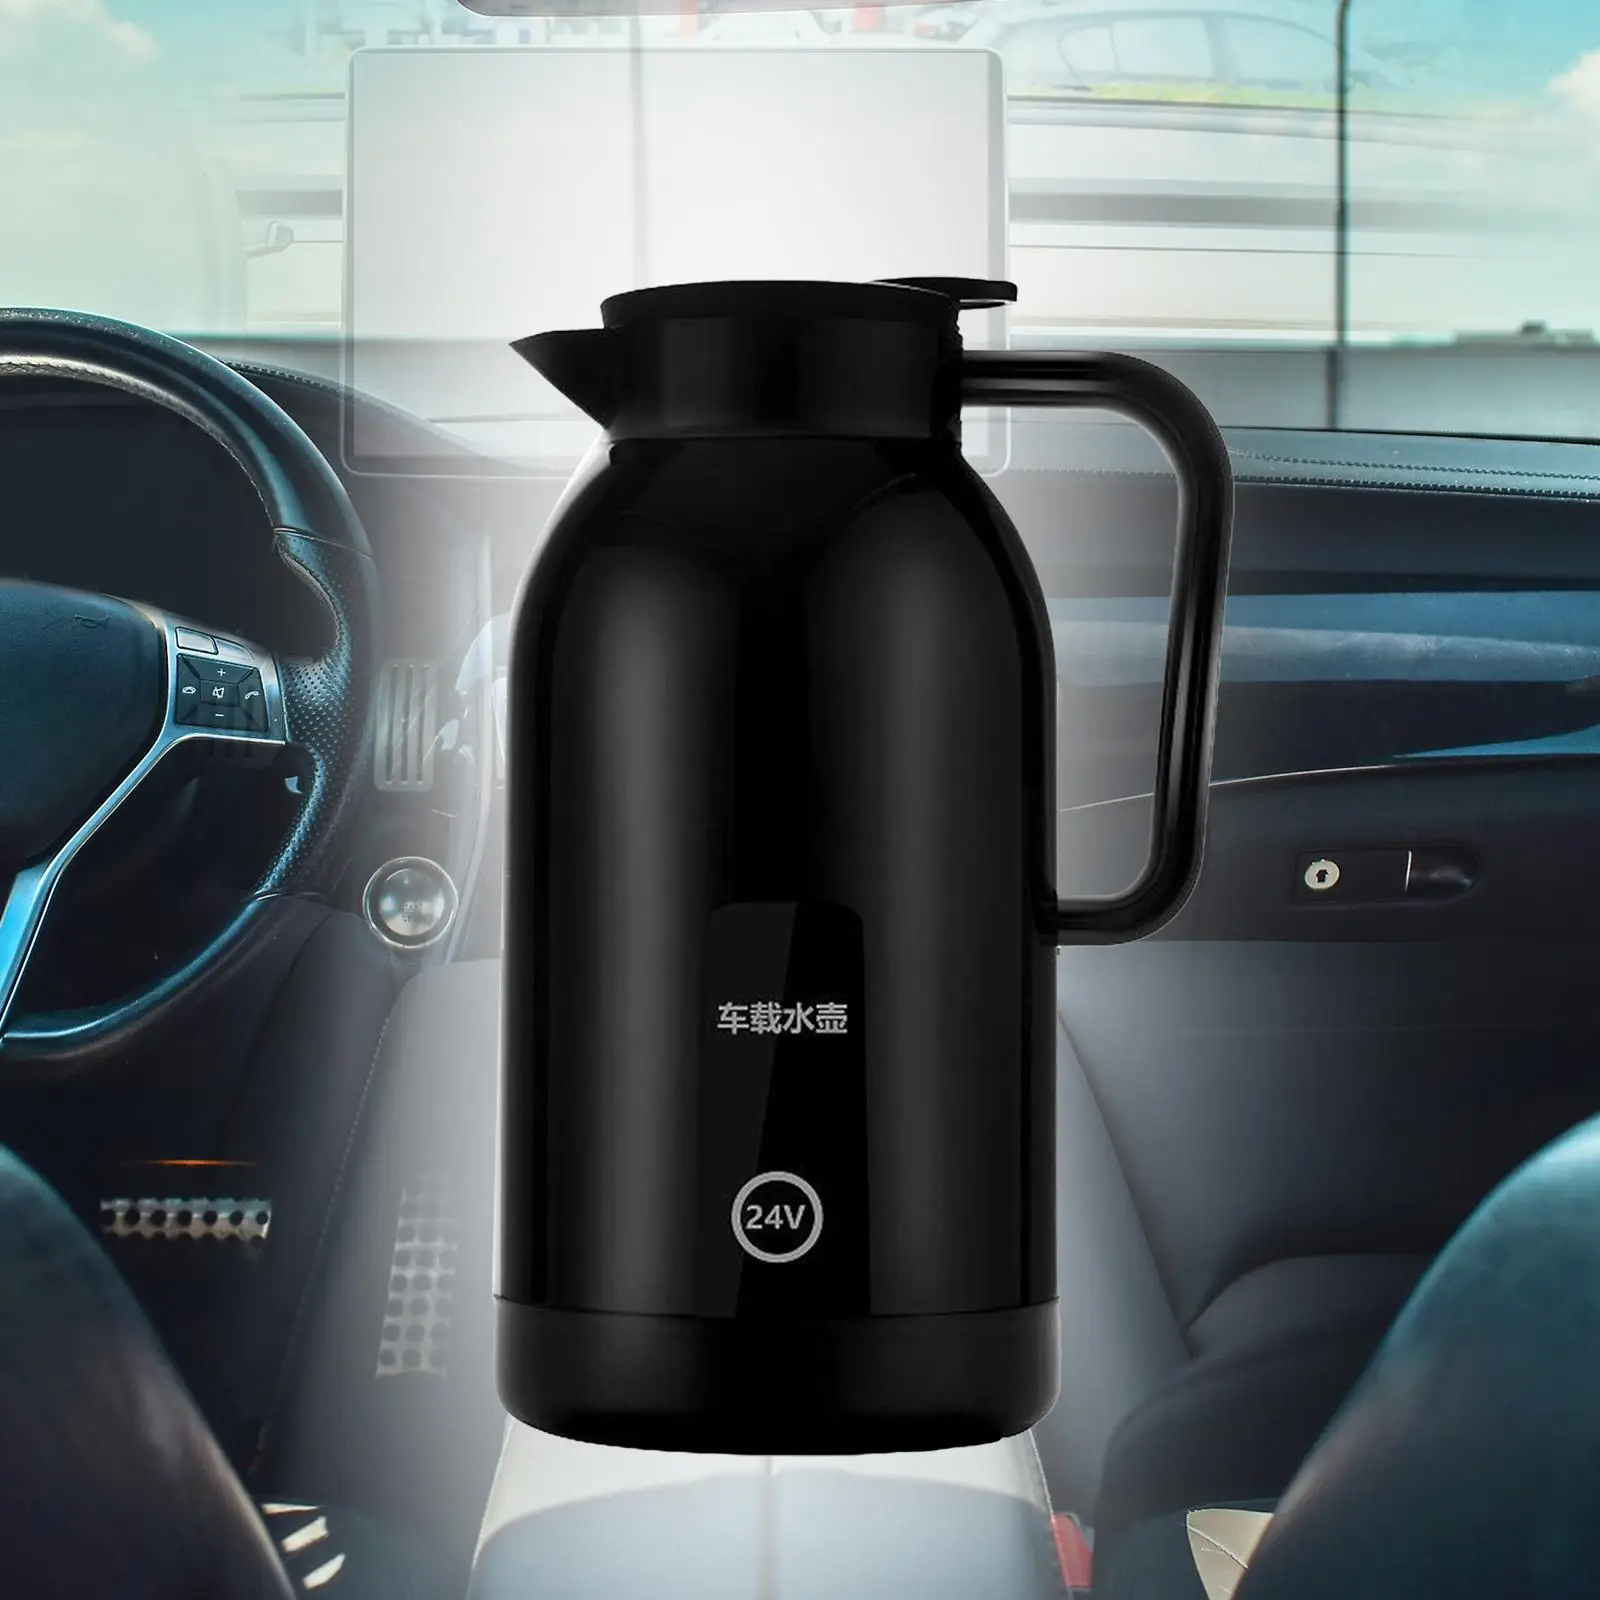 Car Kettle Fast Heating 12Hrs Warmer Portable for Water Tea Coffee Milk Water Heating Bottle for Self Driving Tour Truck Drivers